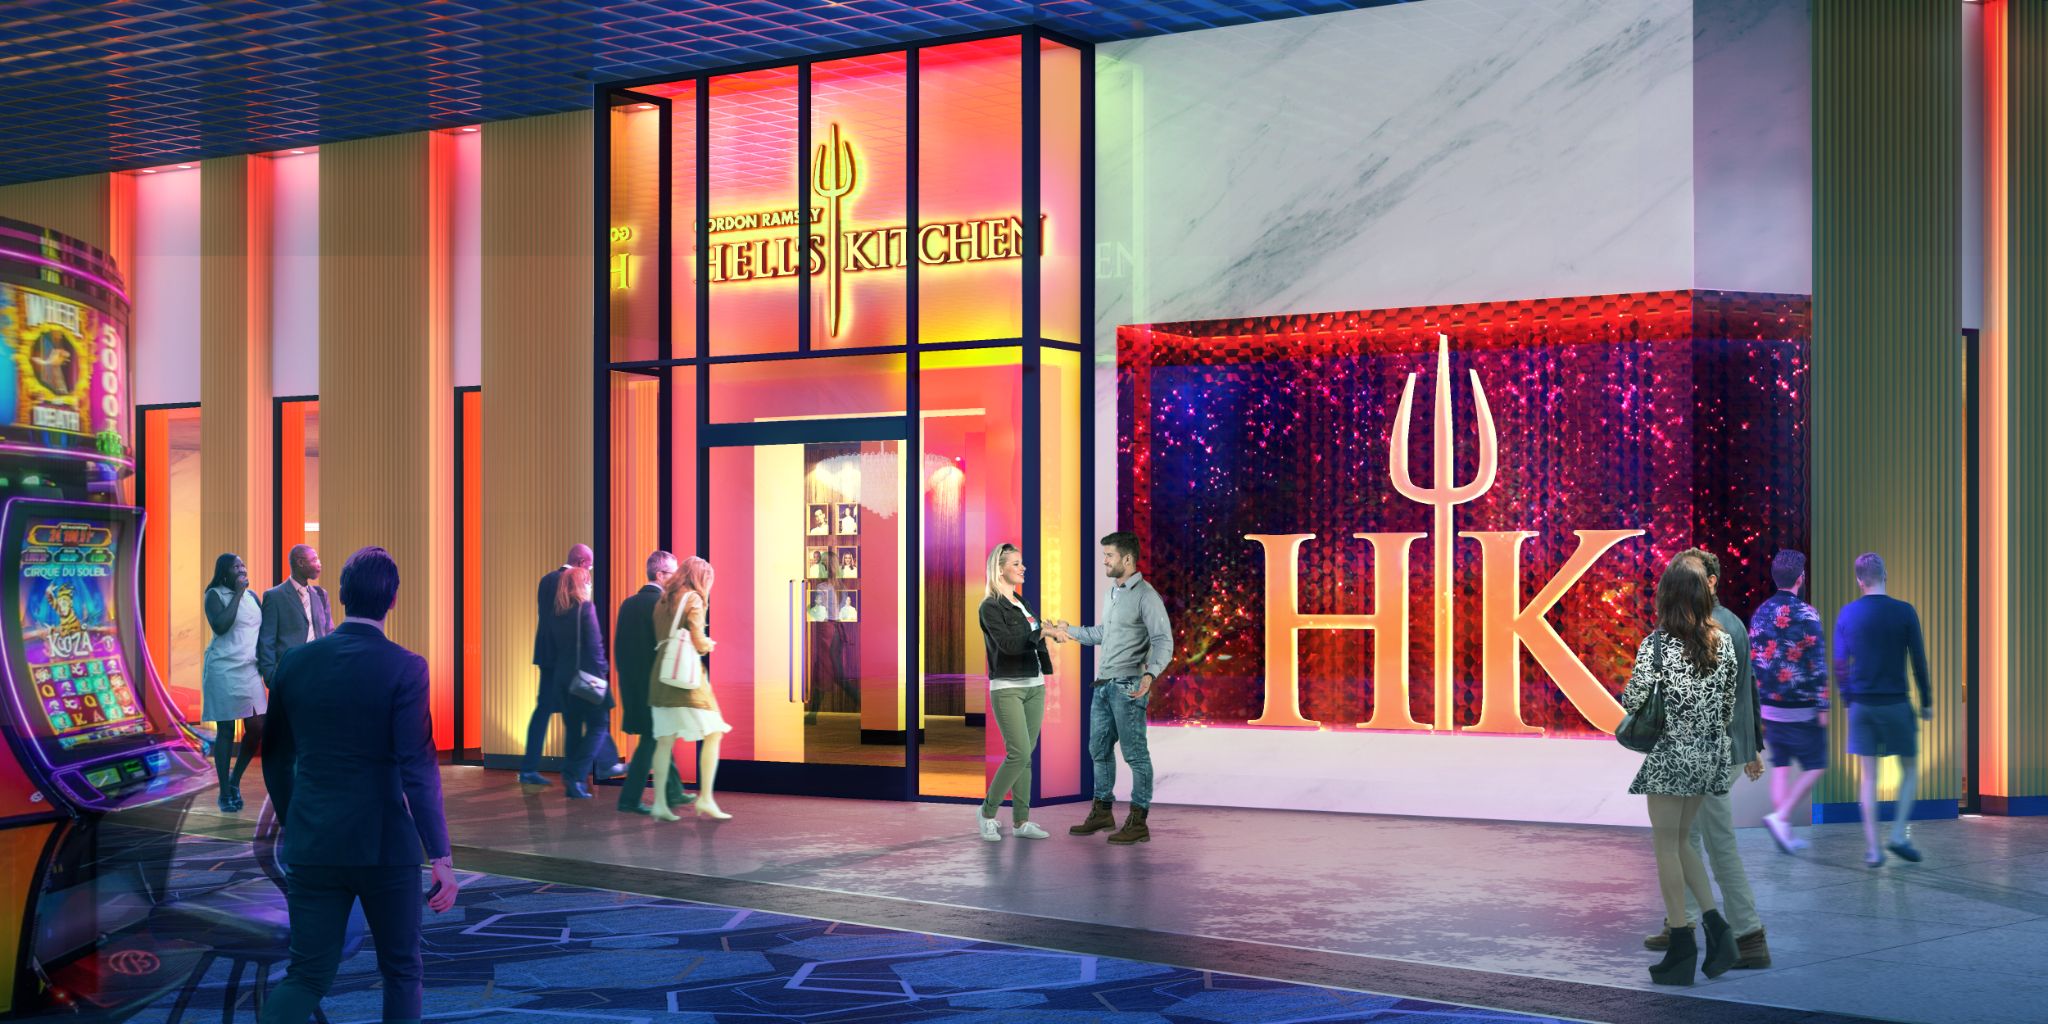 Rendering of a Hell’s Kitchen restaurant storefront.